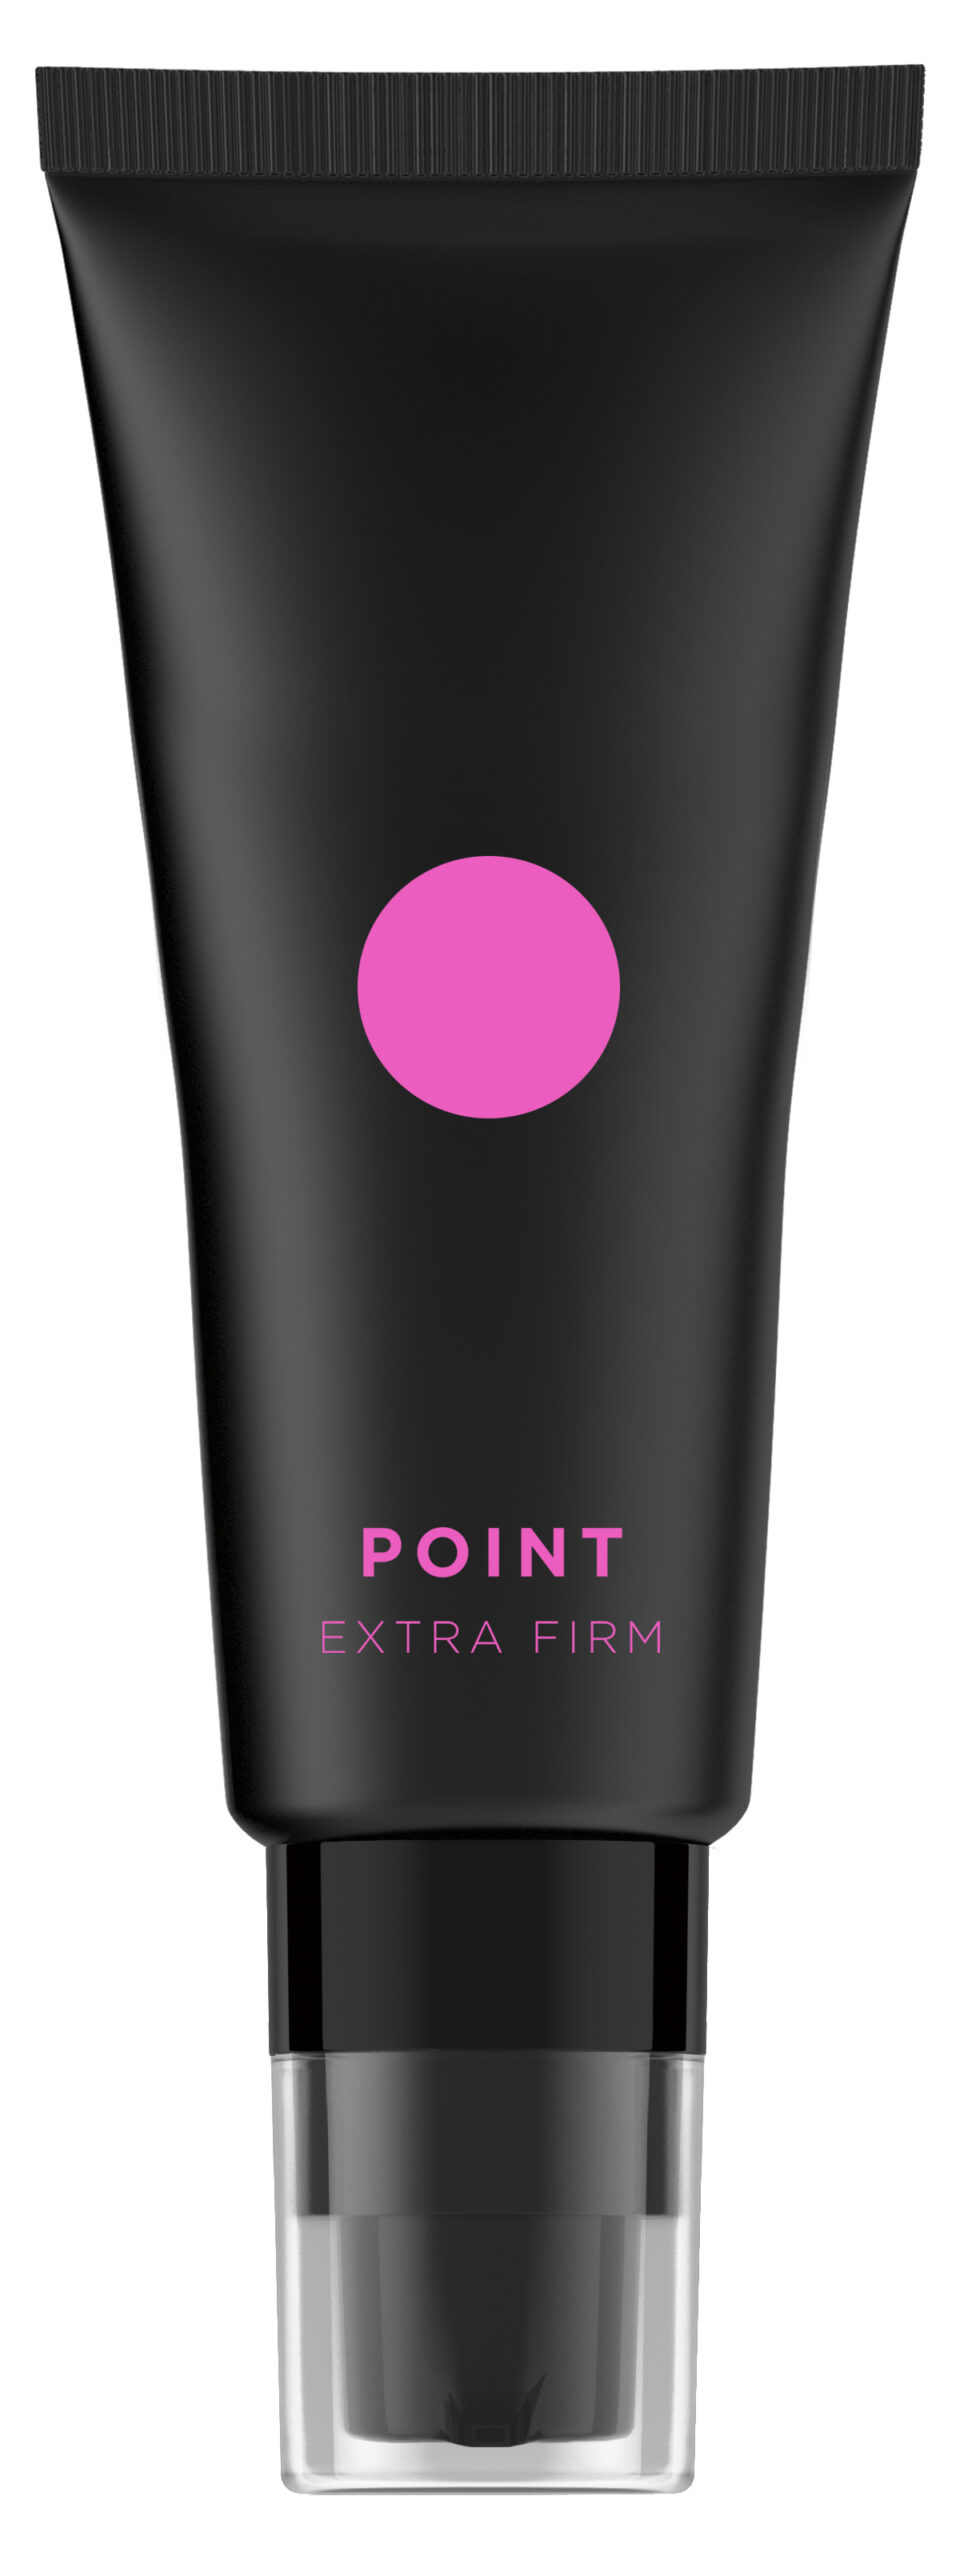 POINT Extra Firm